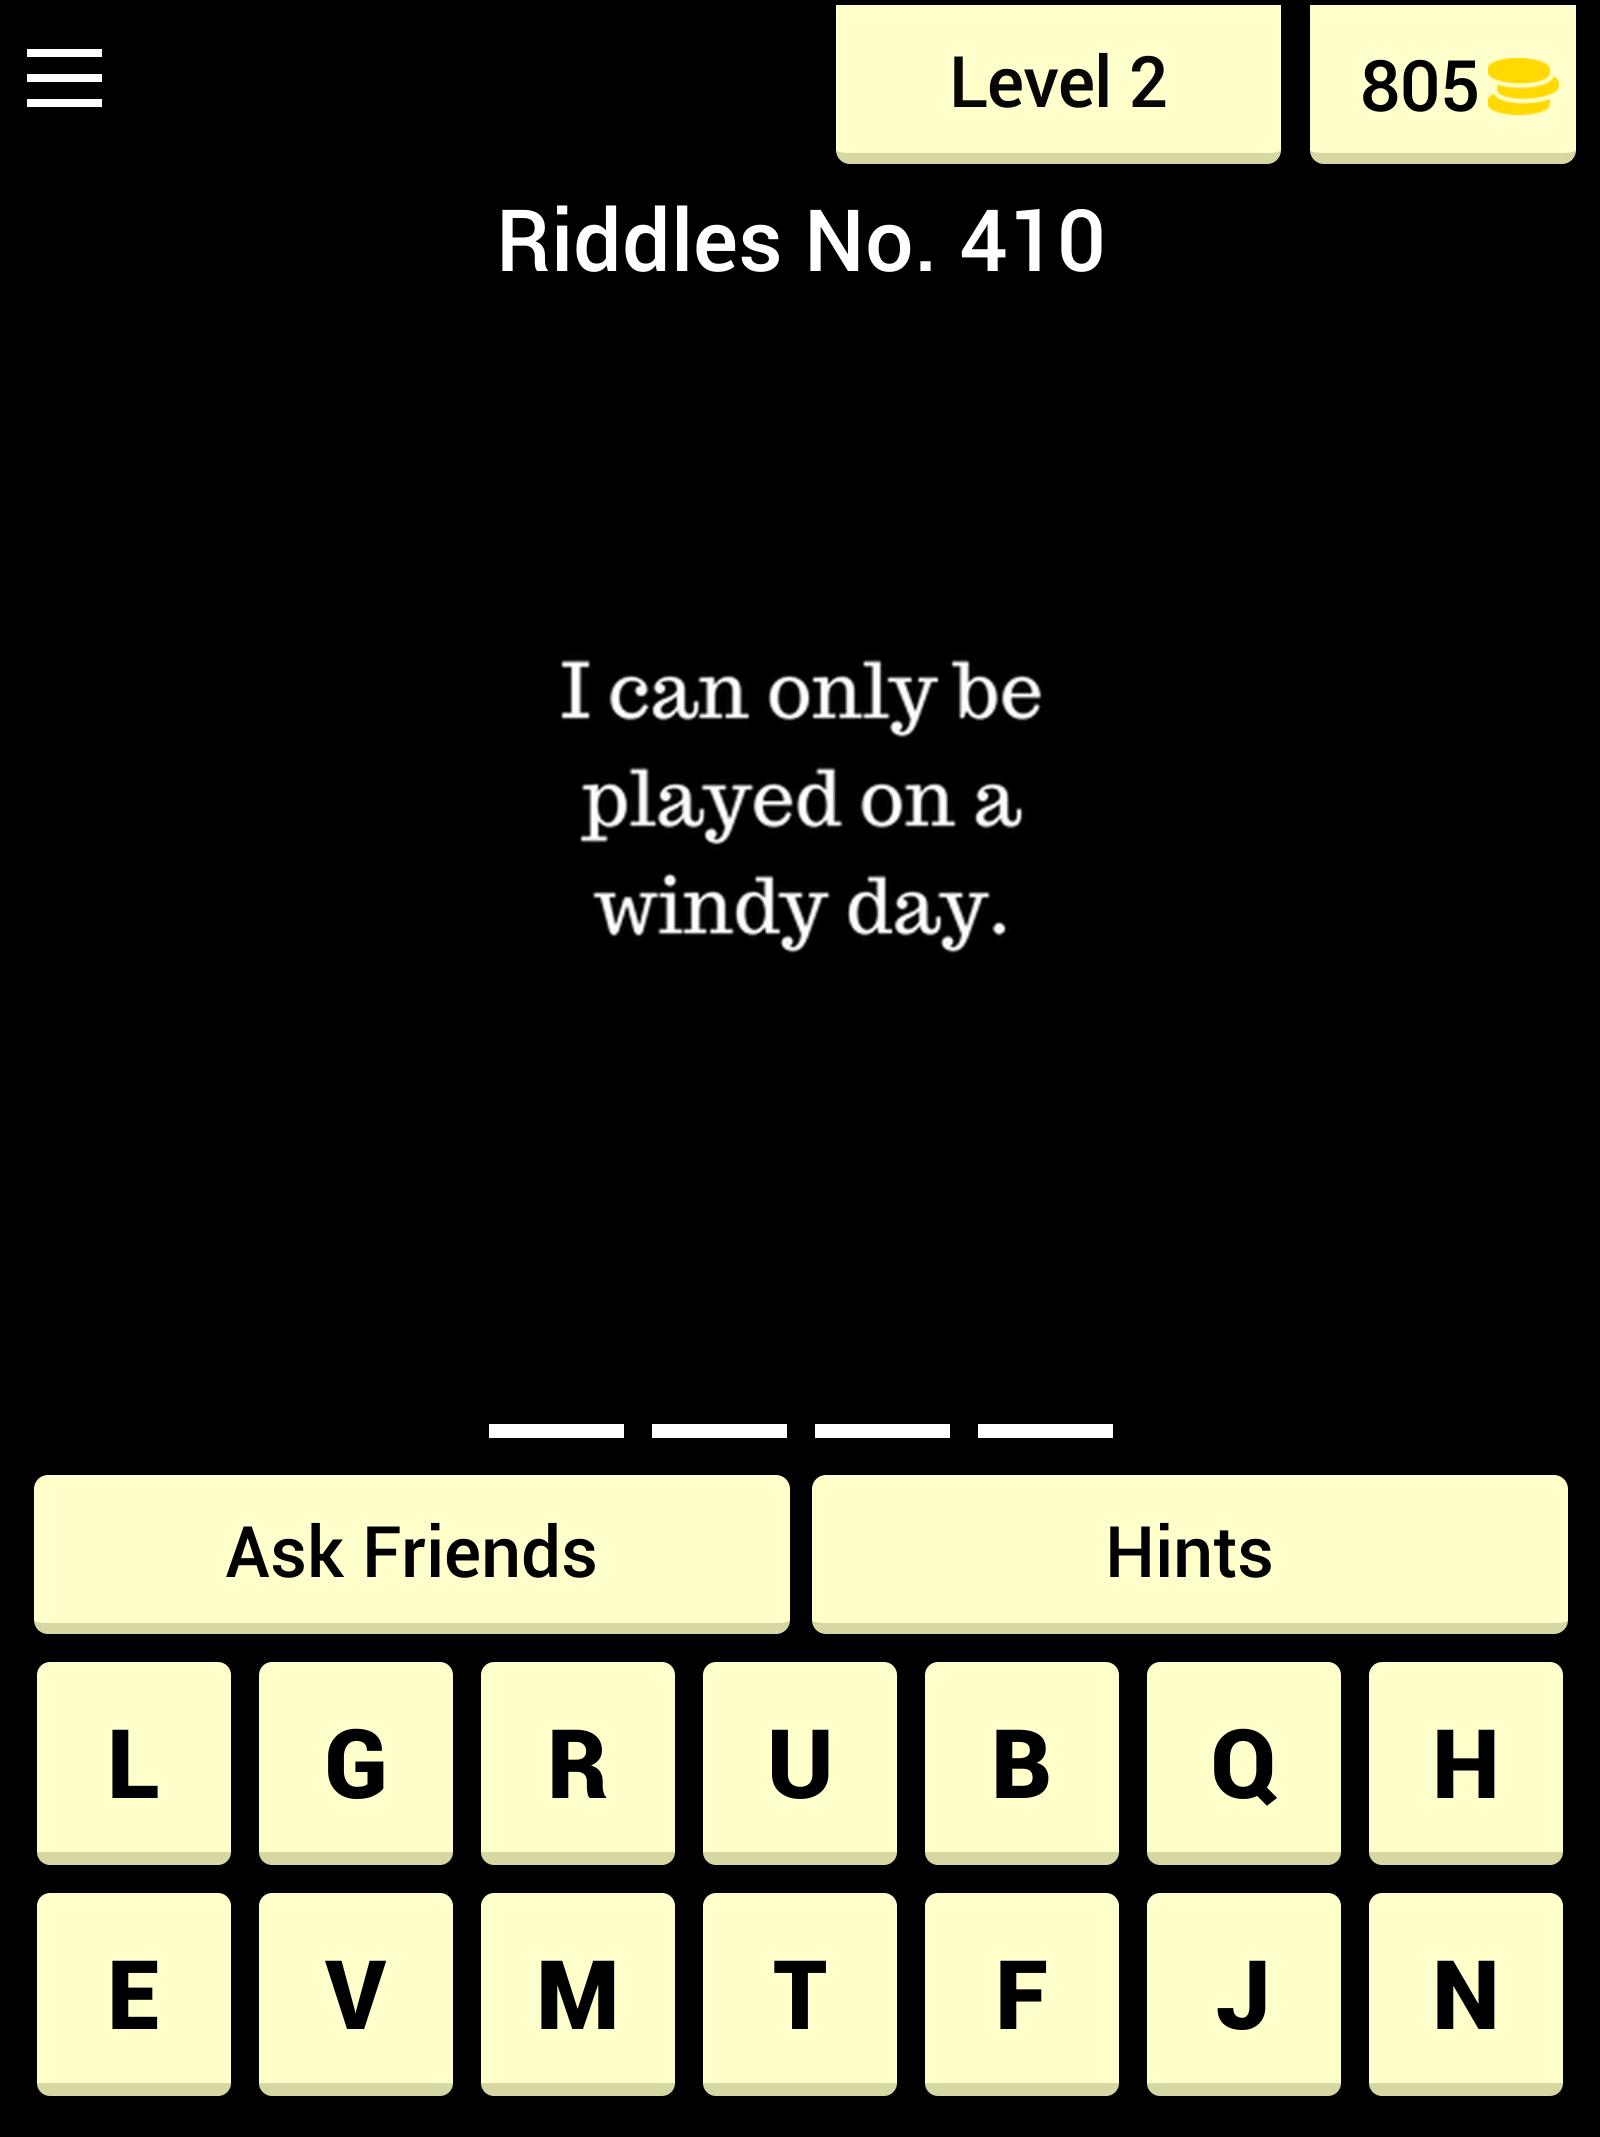 Pinoy Riddles in English for Android - APK Download